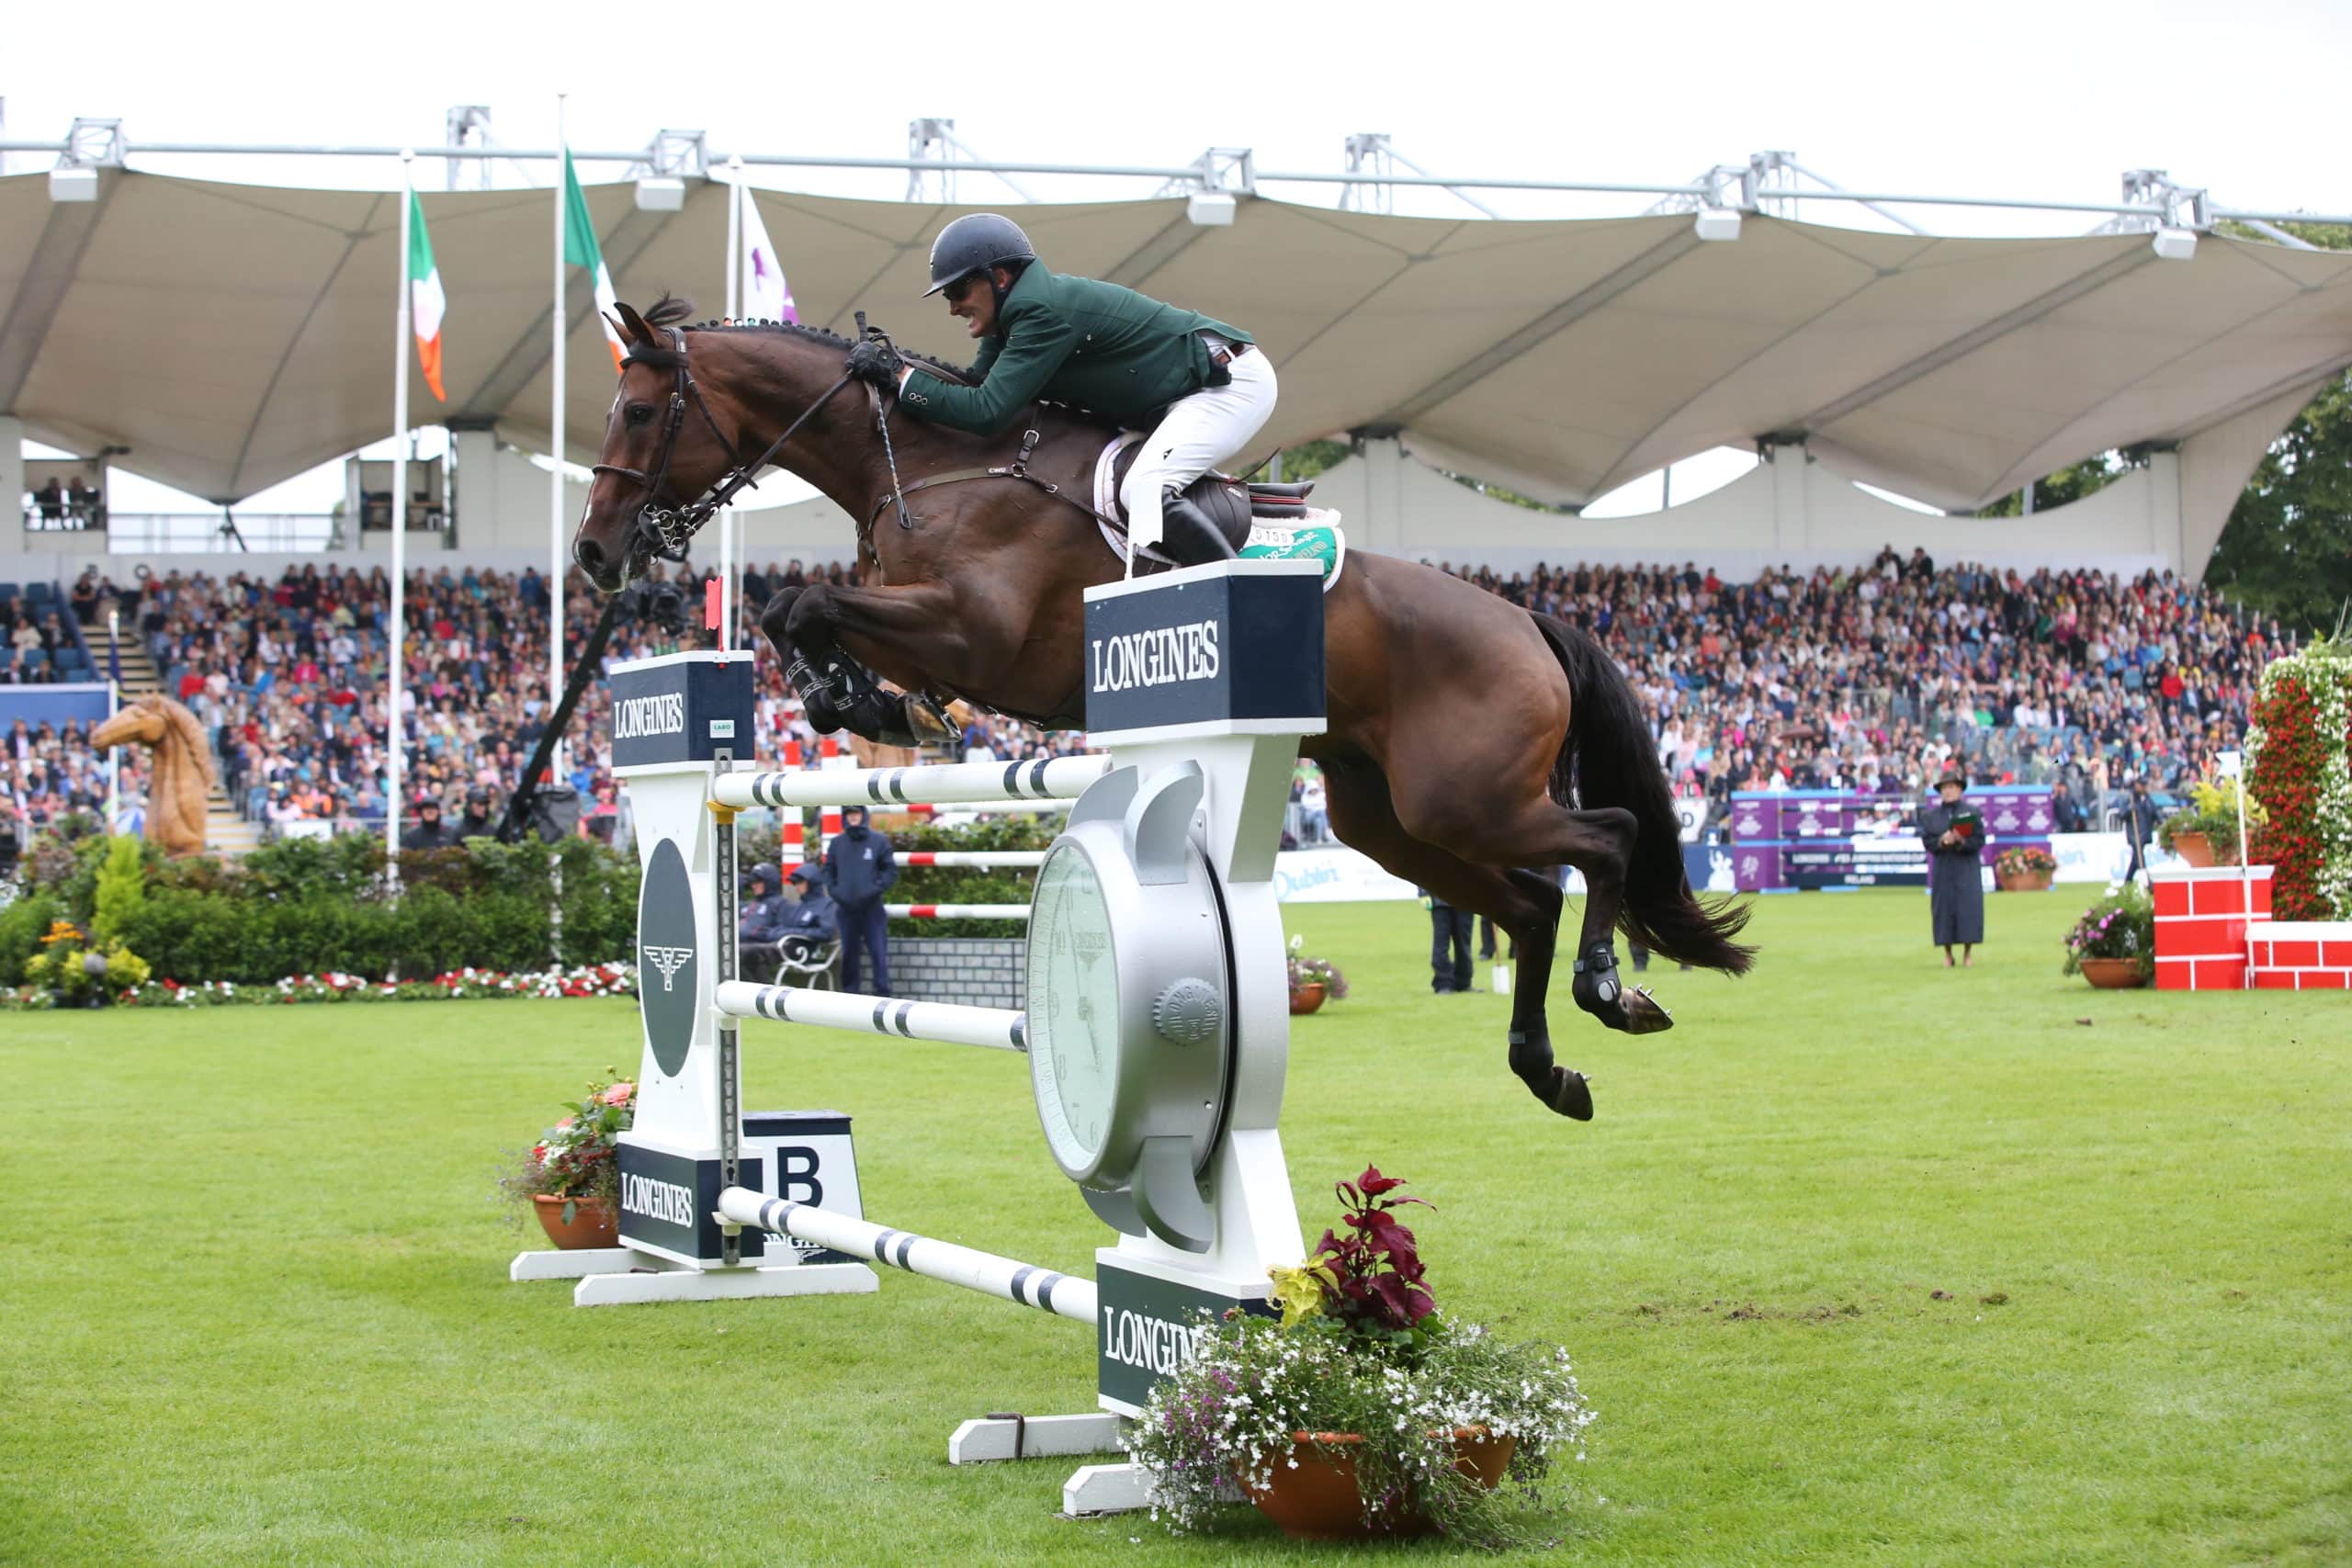 The Dublin Horse Show - What Makes It So Special?